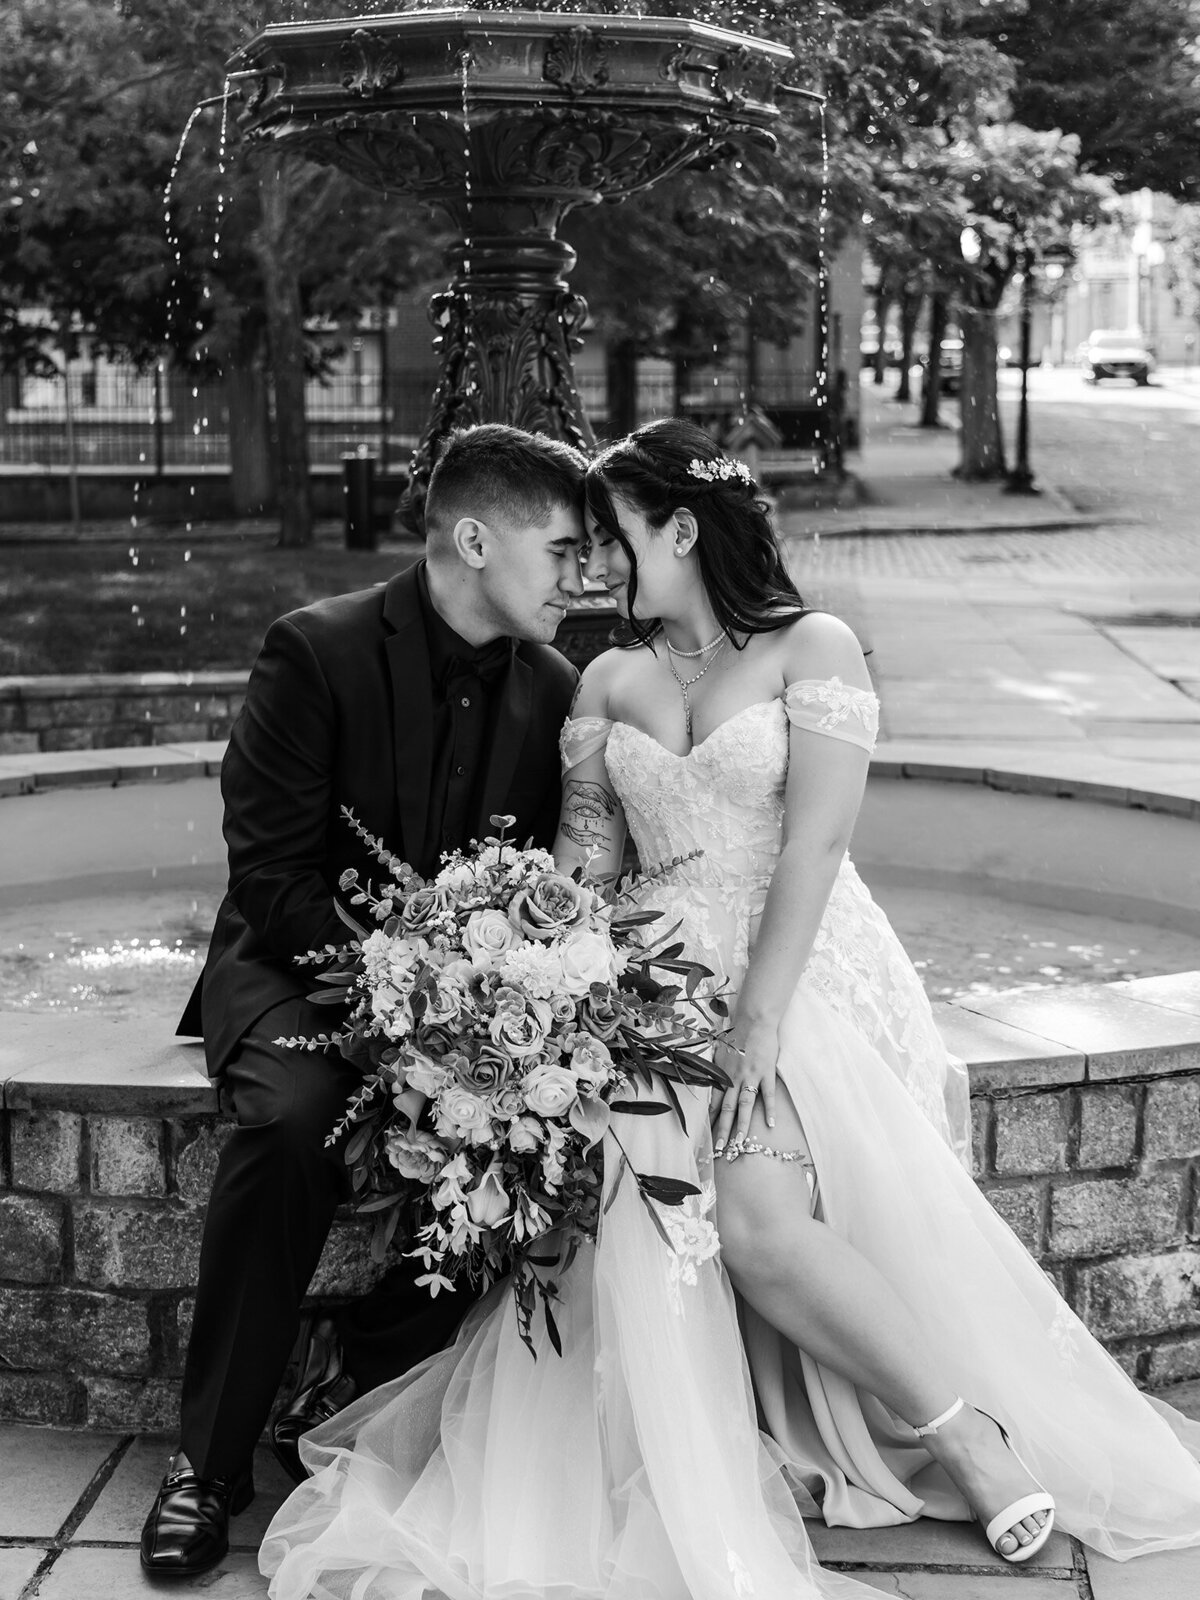 Black and white photograph of a newlywed bride and groom sitting on the edge of a water fountain with the groom wearing an all black tux and the bride wearing an off-the-shoulder white gown with embellished lace corset and a-line skirt holding her cascading wedding bouquet  in the middle of their laps while they put their heads together